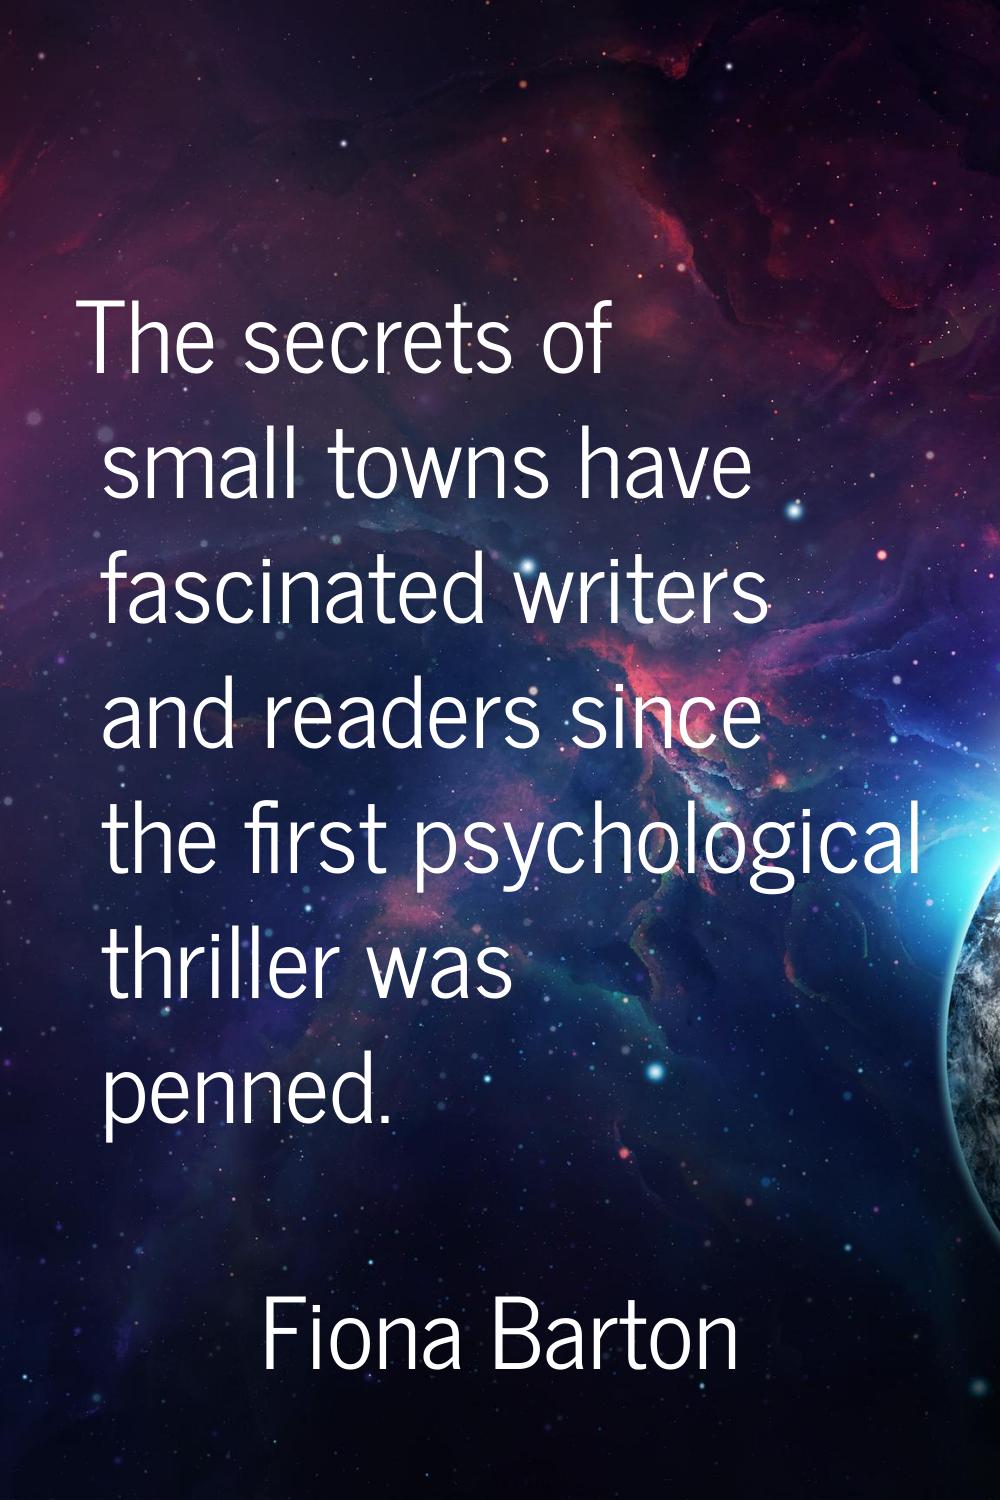 The secrets of small towns have fascinated writers and readers since the first psychological thrill